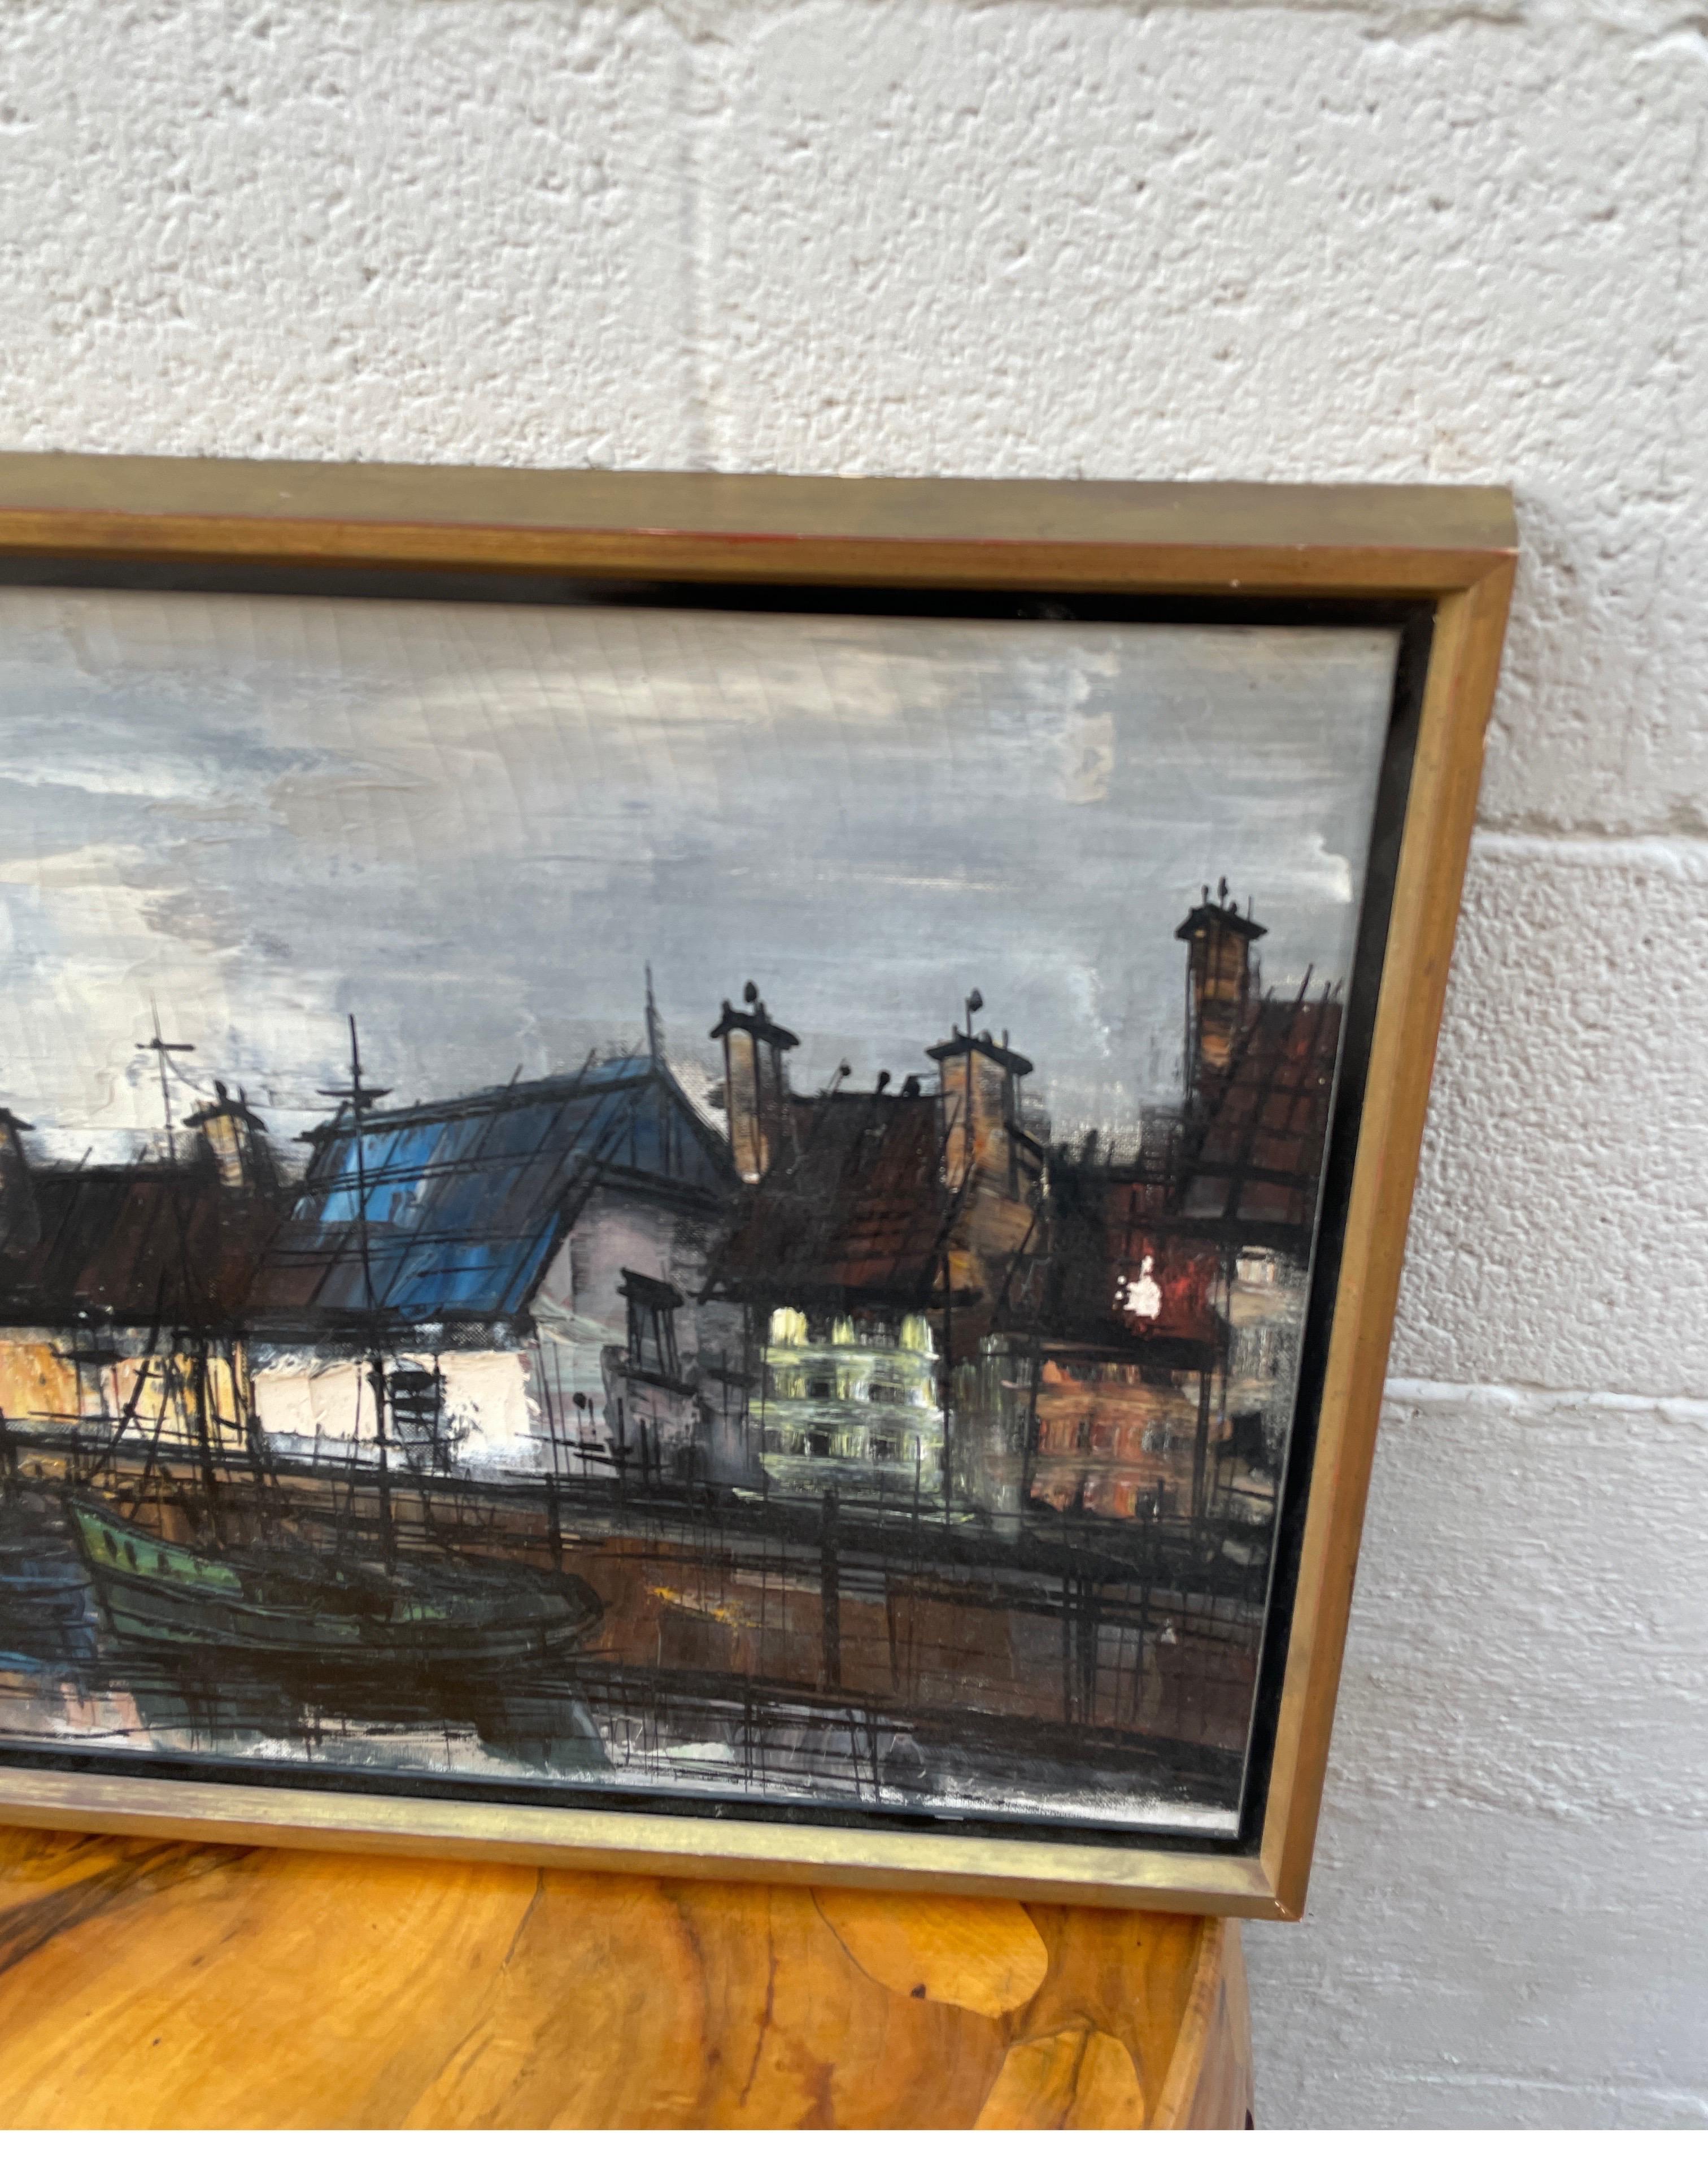 Original oil painting of boat in harbor in the style of Bernard Buffet.